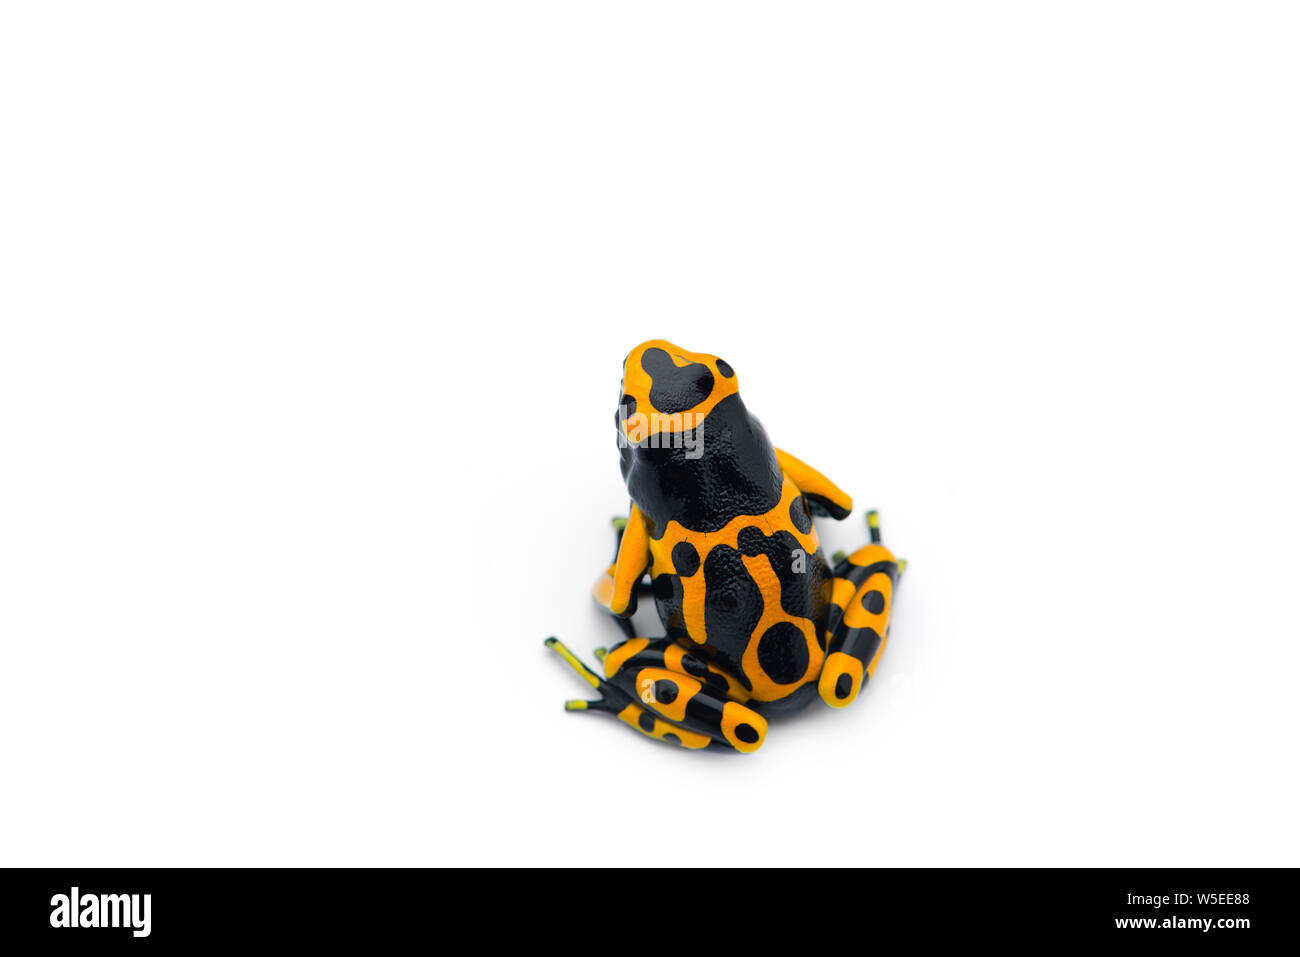 The yellow-banded poison dart frog isolated on white background Stock Photo